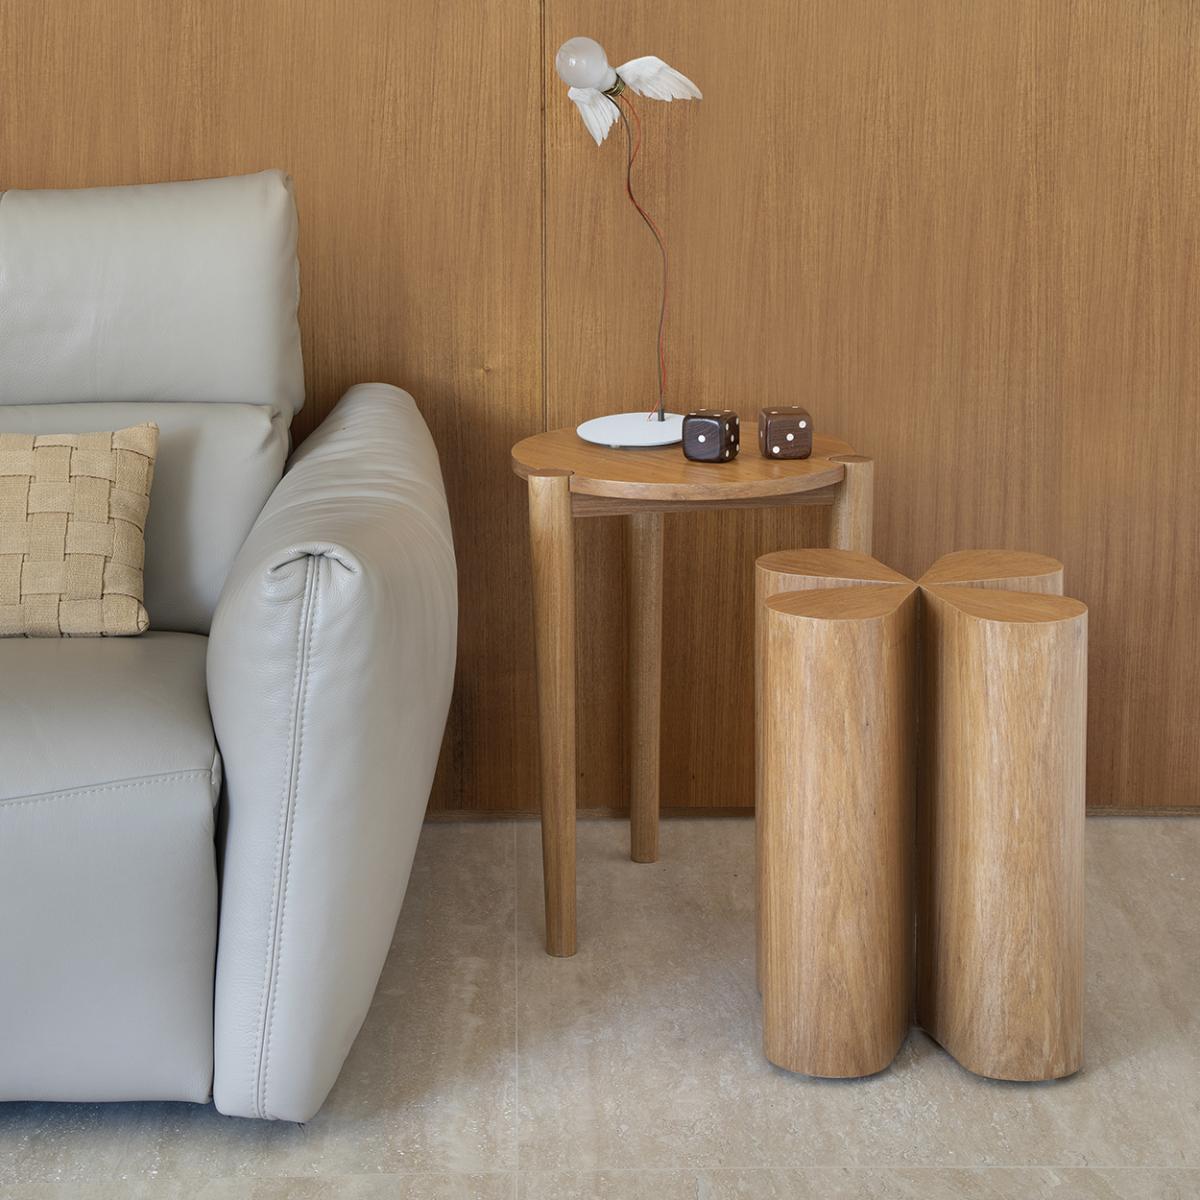 This side table is inspired by the outline of a four-leaf clover, which brings a lot of meanings behind it. They say it is a sign of good luck, good fortune and, in addition, the four-leaf clover can also represent cycles. The four phases of the